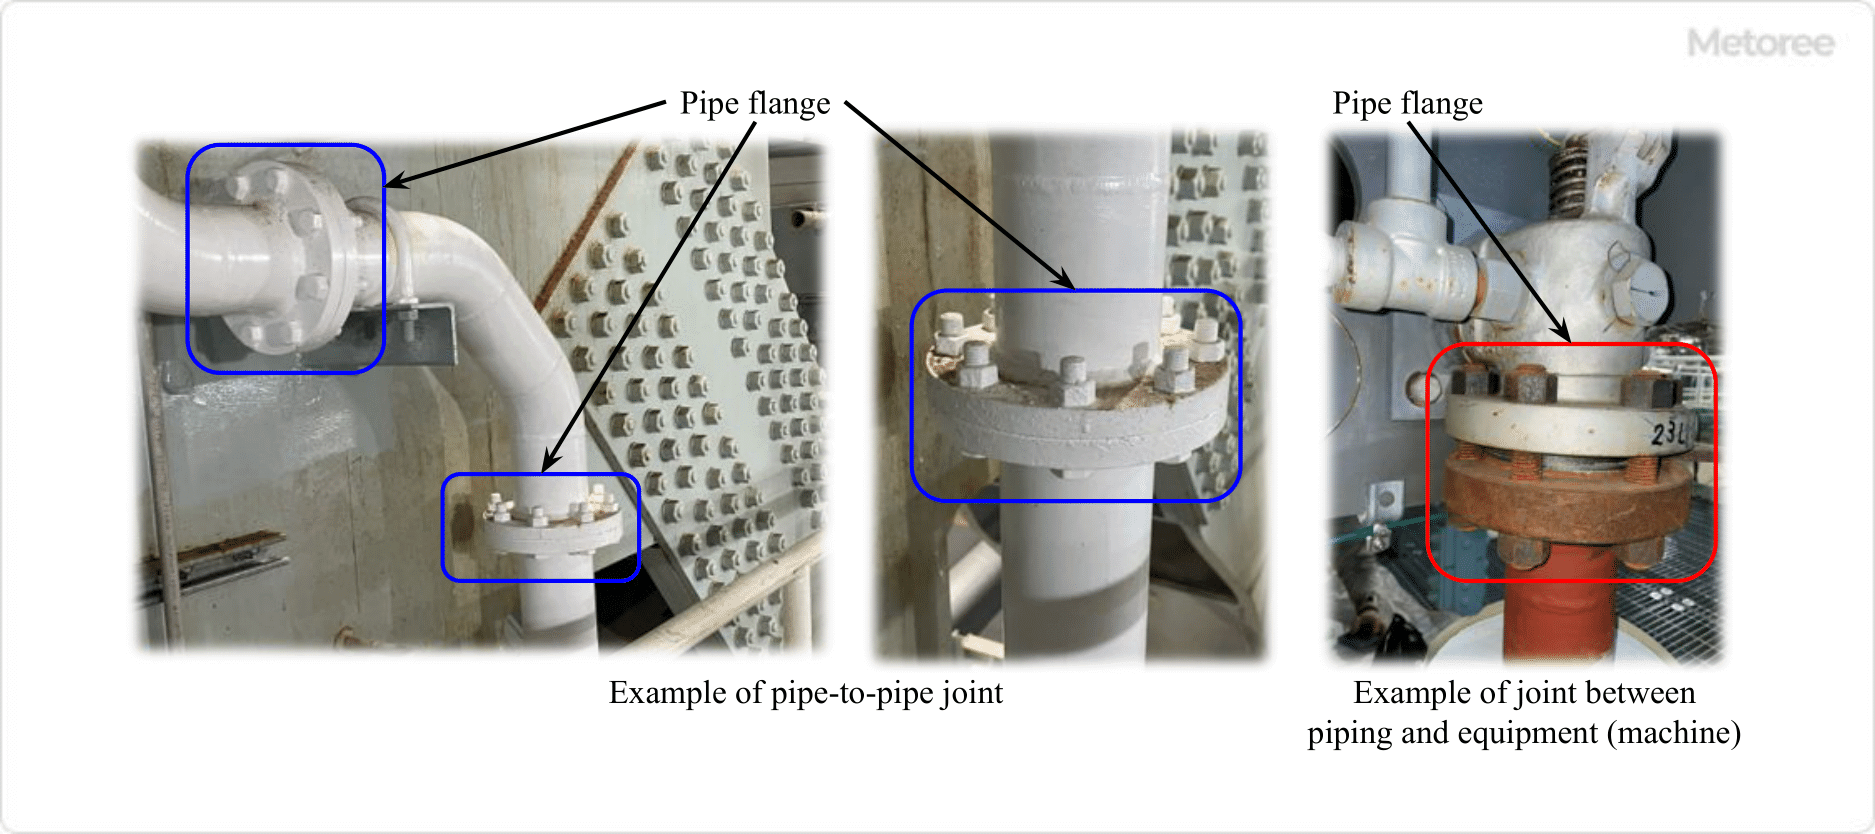 Figure 1. Example of pipe flange use